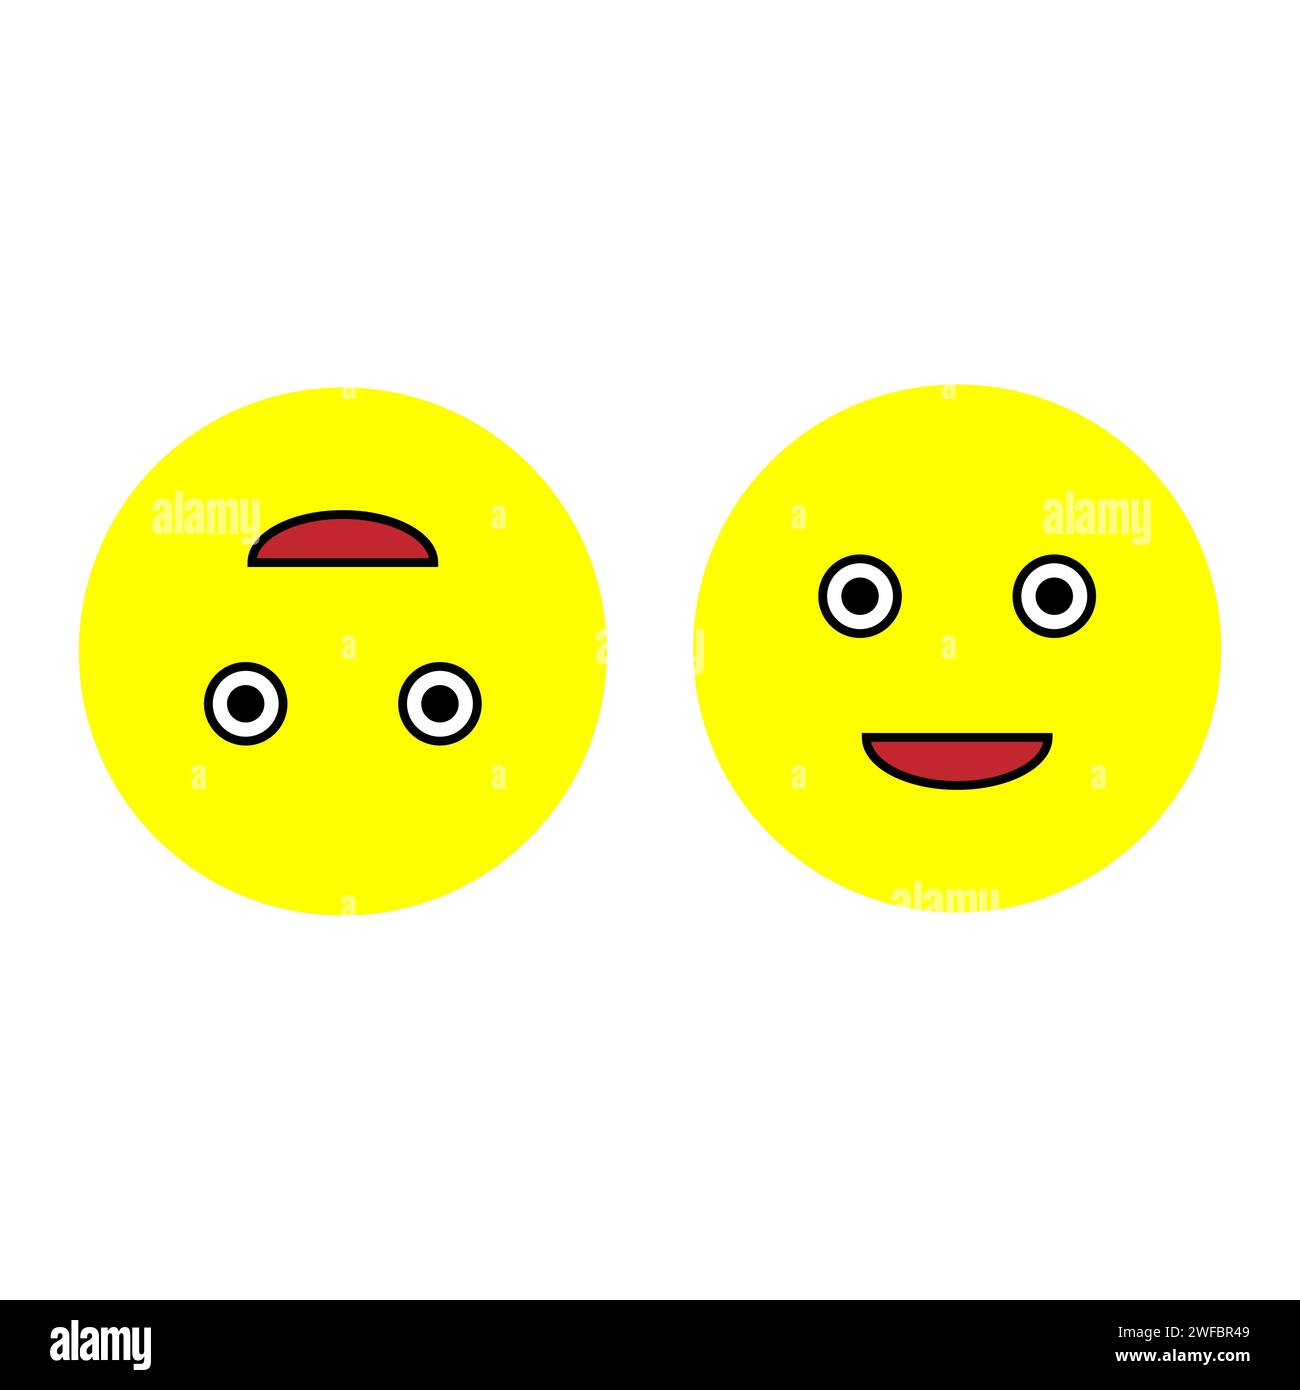 Happy emoji. Message button. Communication background. Yellow icon. Emotion face. Vector illustration. Stock image. EPS 10. Stock Vector